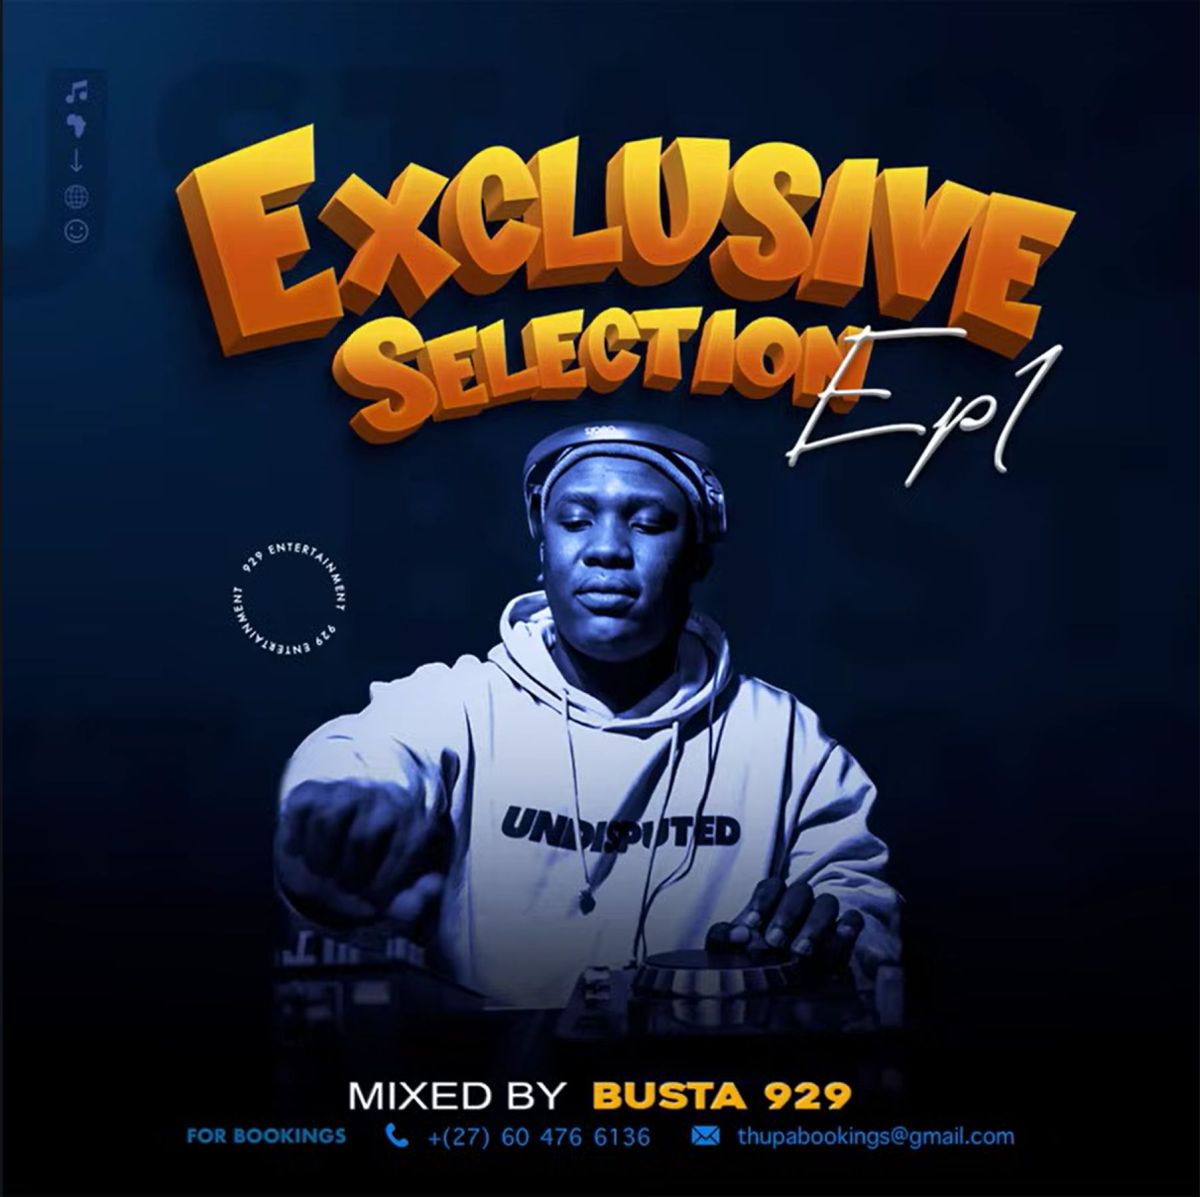 Busta 929 – Exclusive Selection Episode 1 MP3 Download